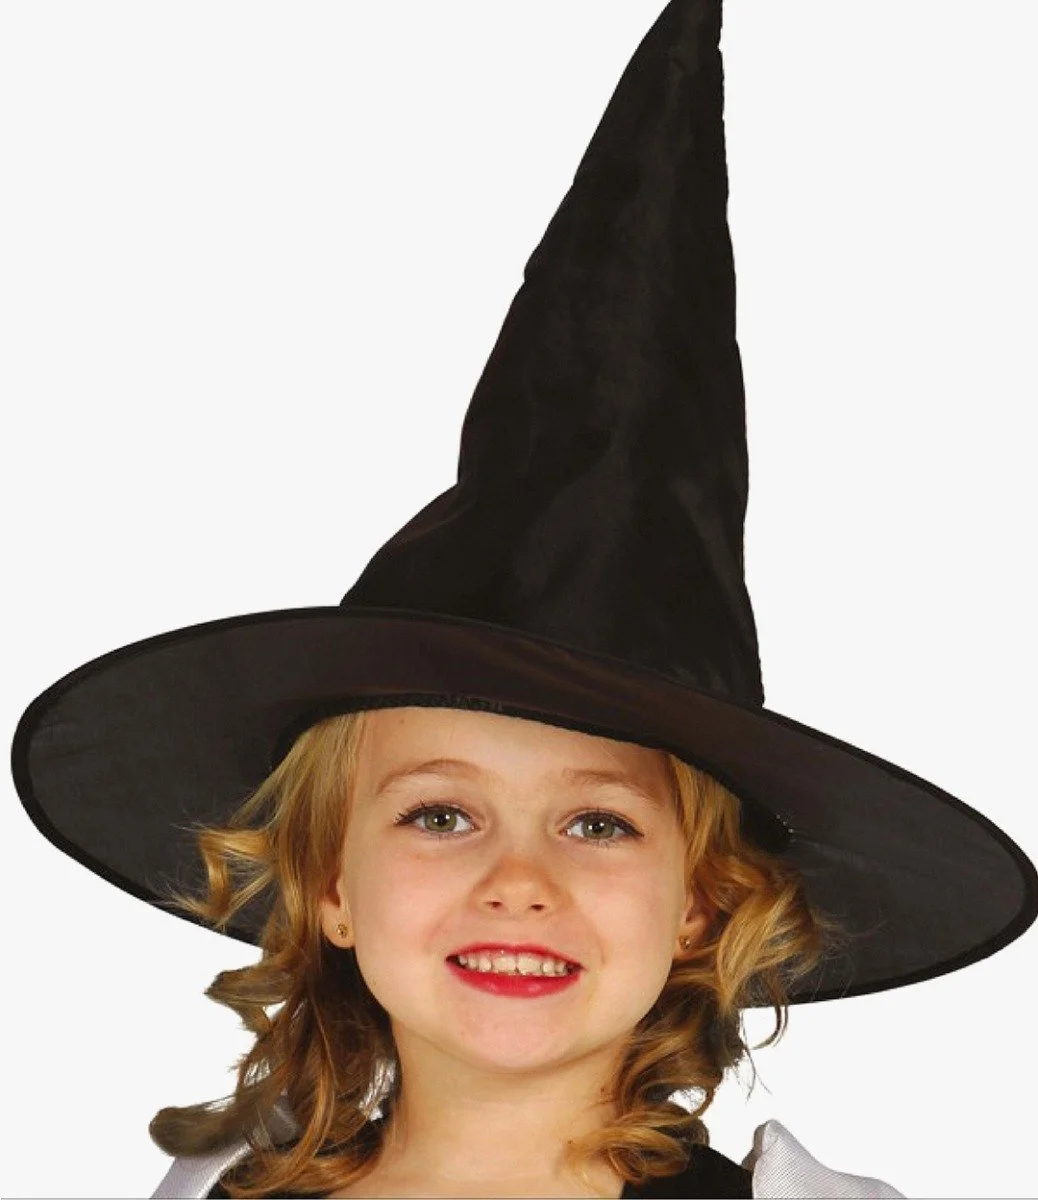 Witch Hat for Kids